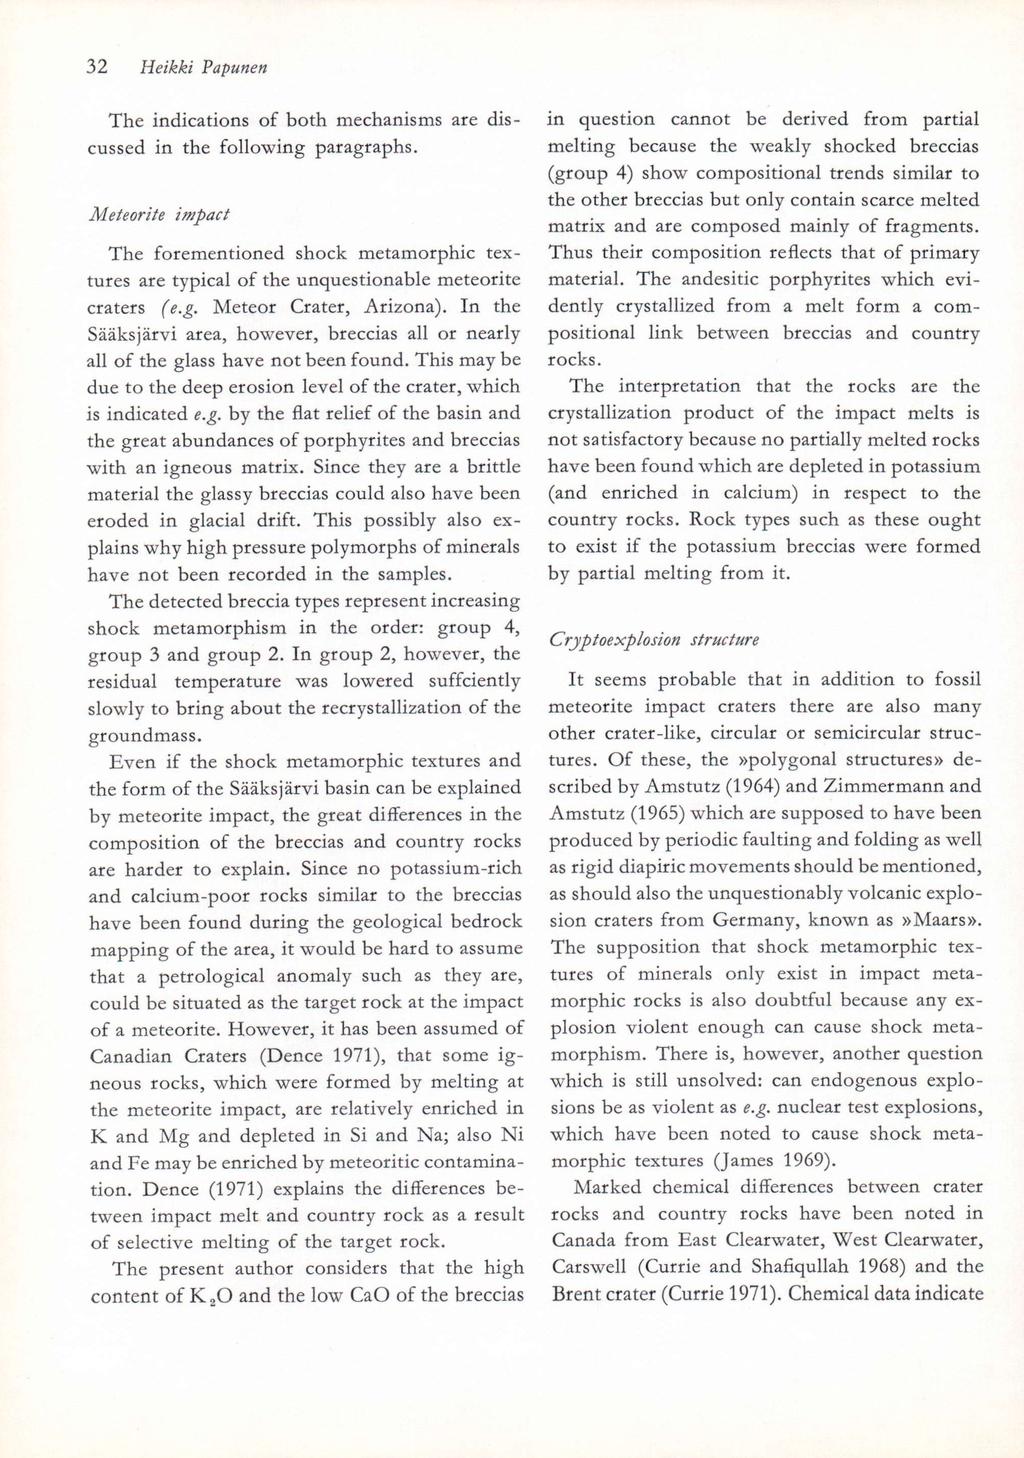 32 Heikki Papunen The indications of both mechanisms are discussed in the following paragraphs.